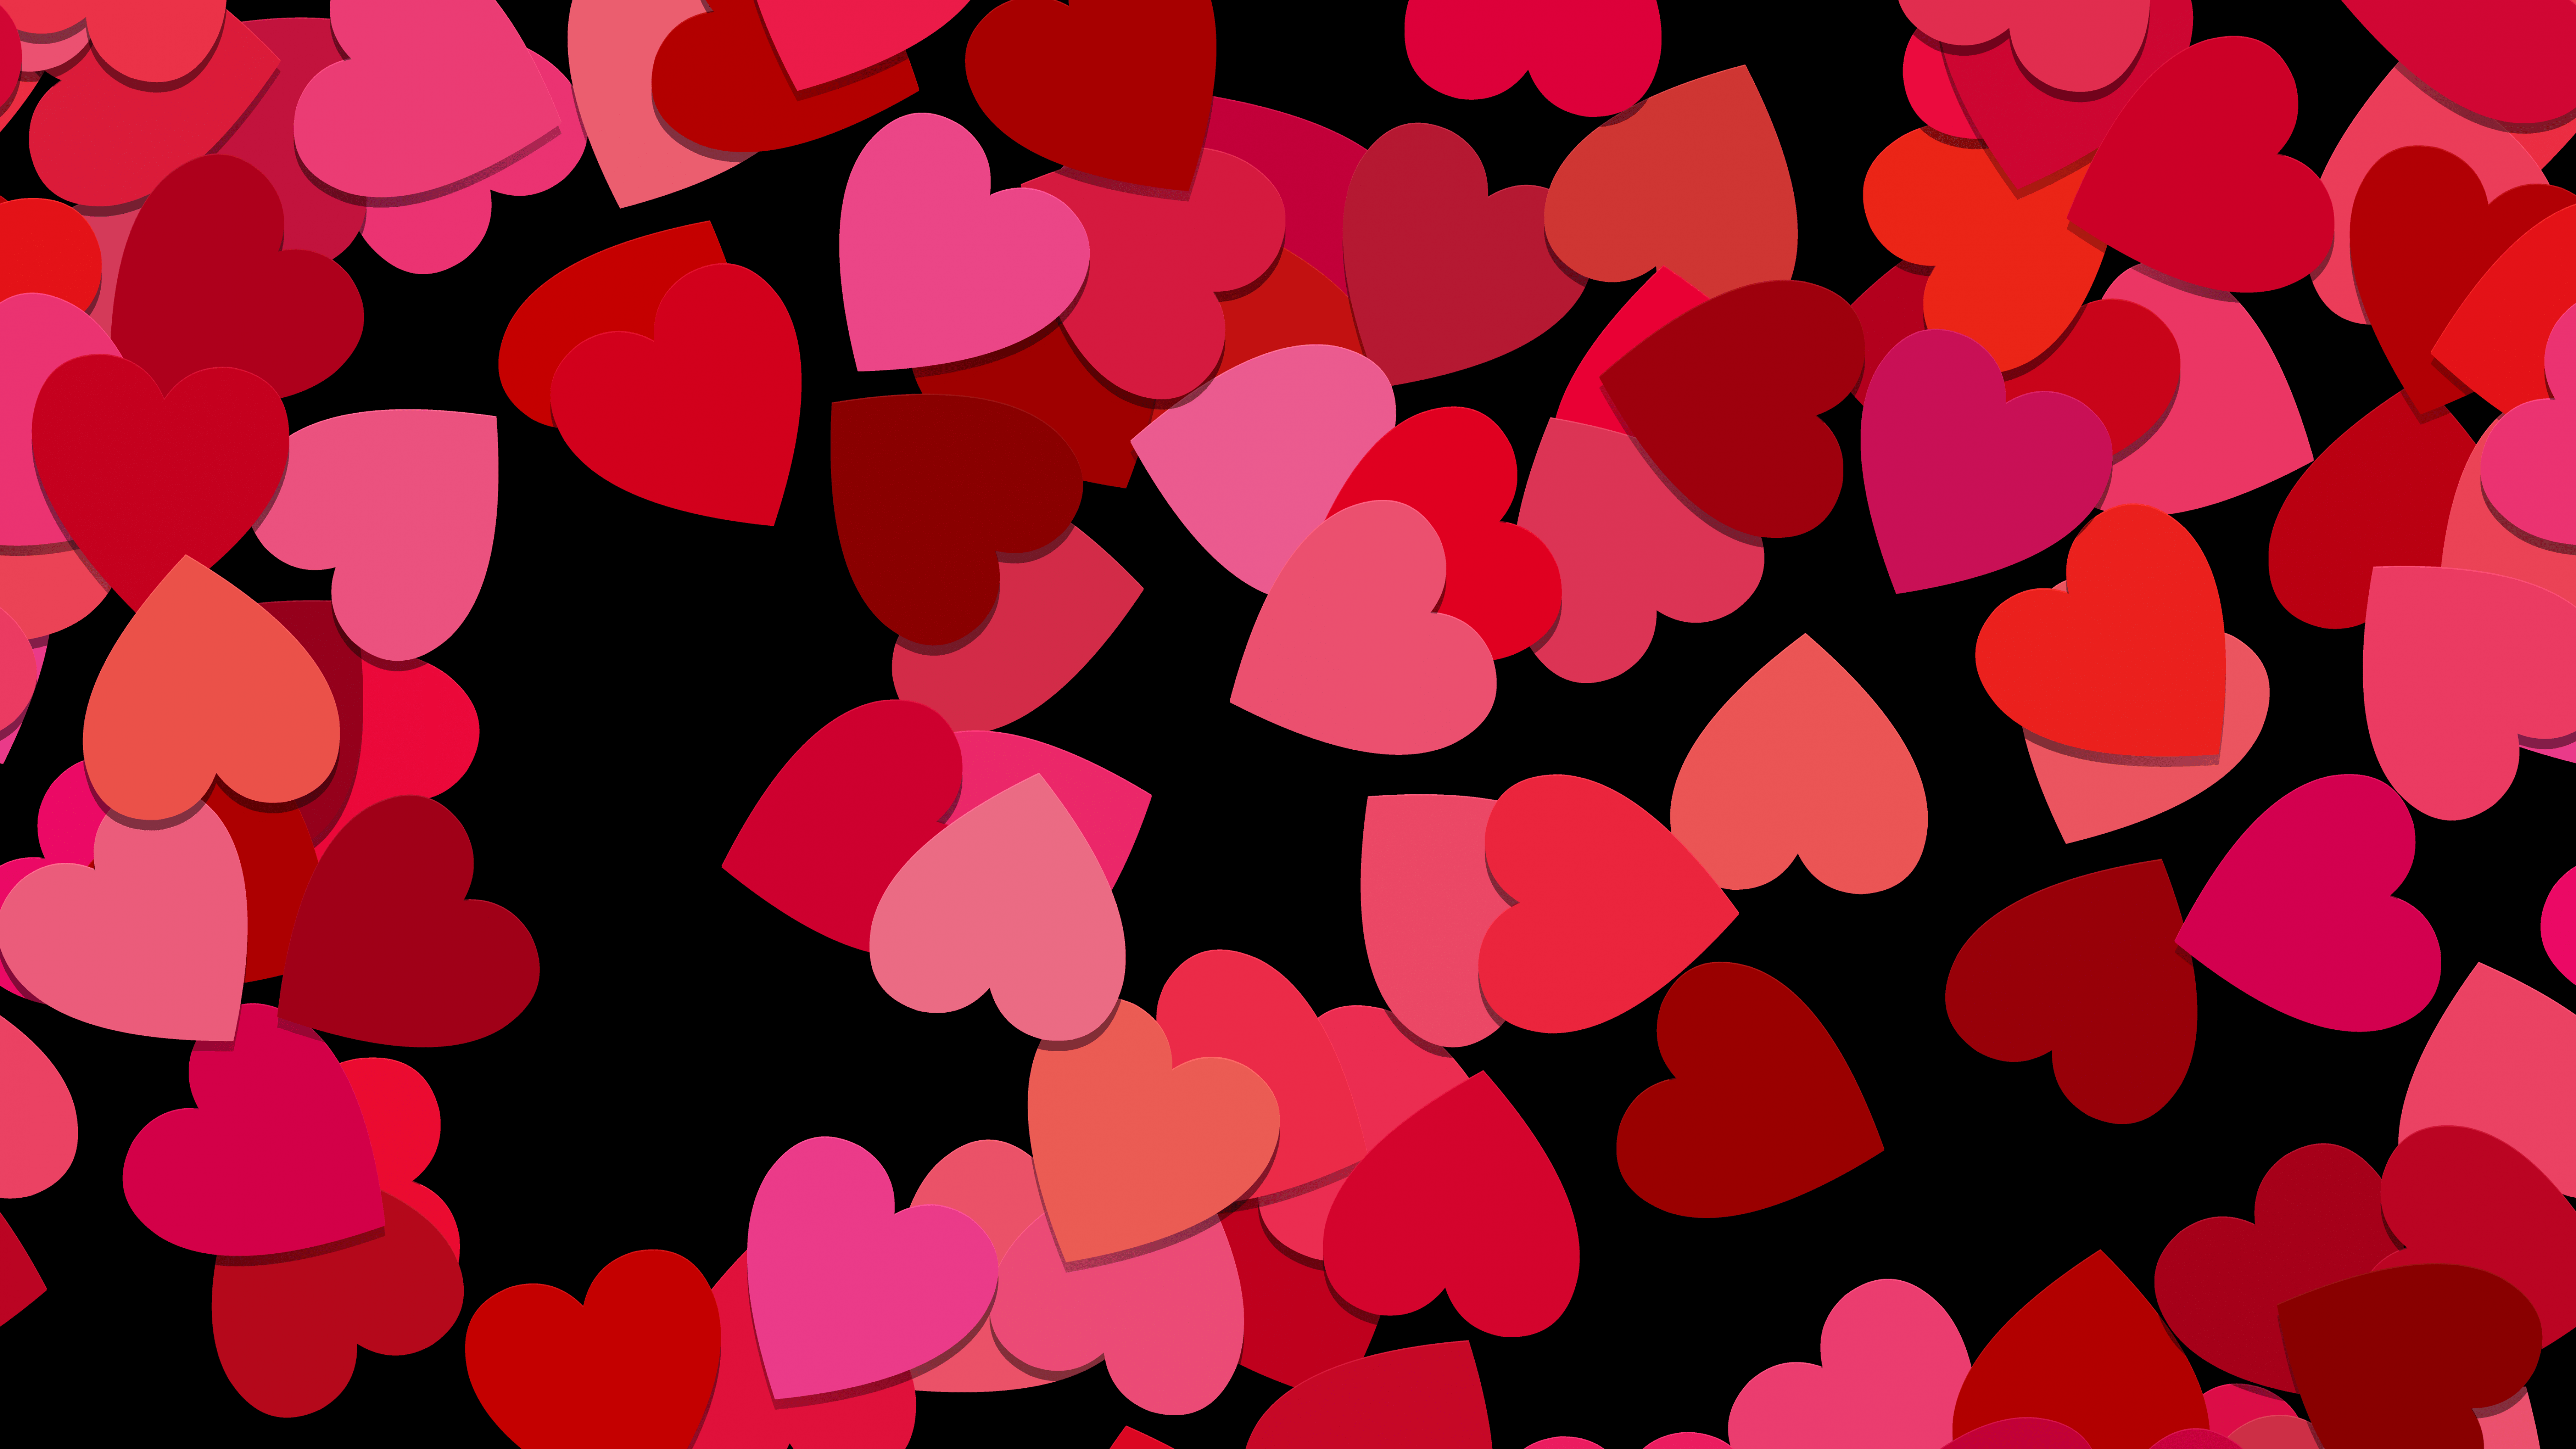 Red and pink hearts on a black background - Love